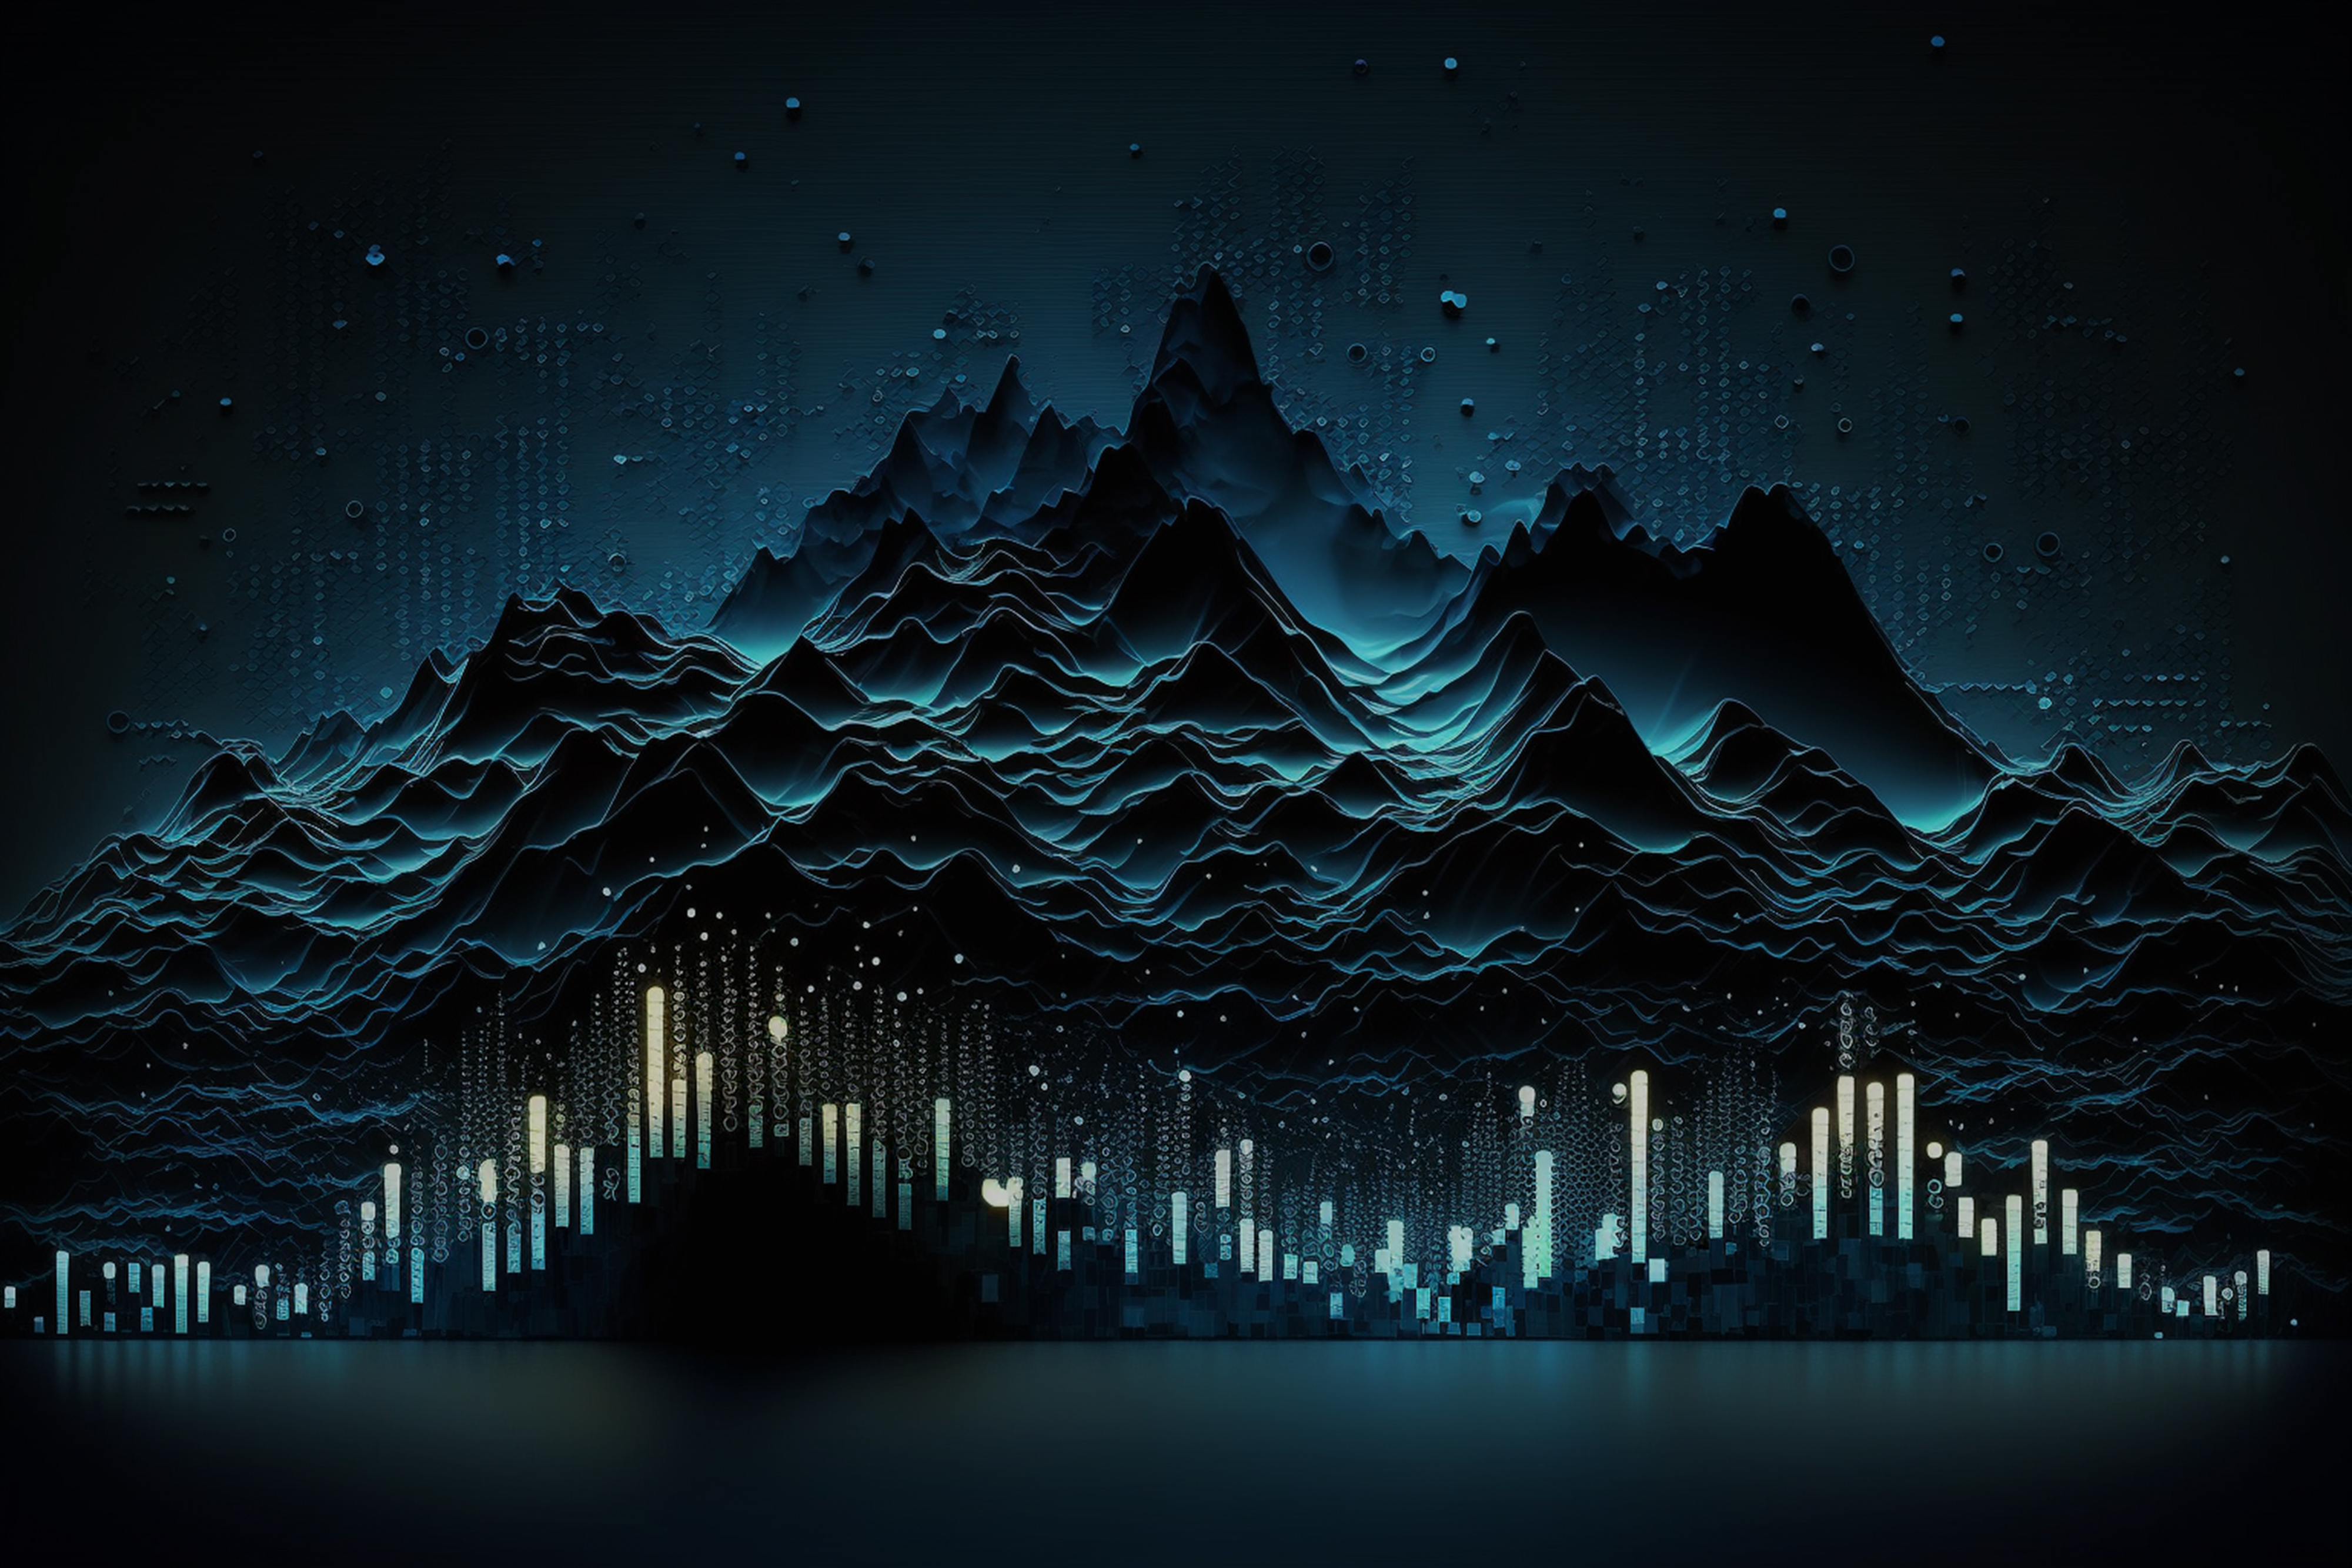 Hero Image of Mountain as a background to data visualizations